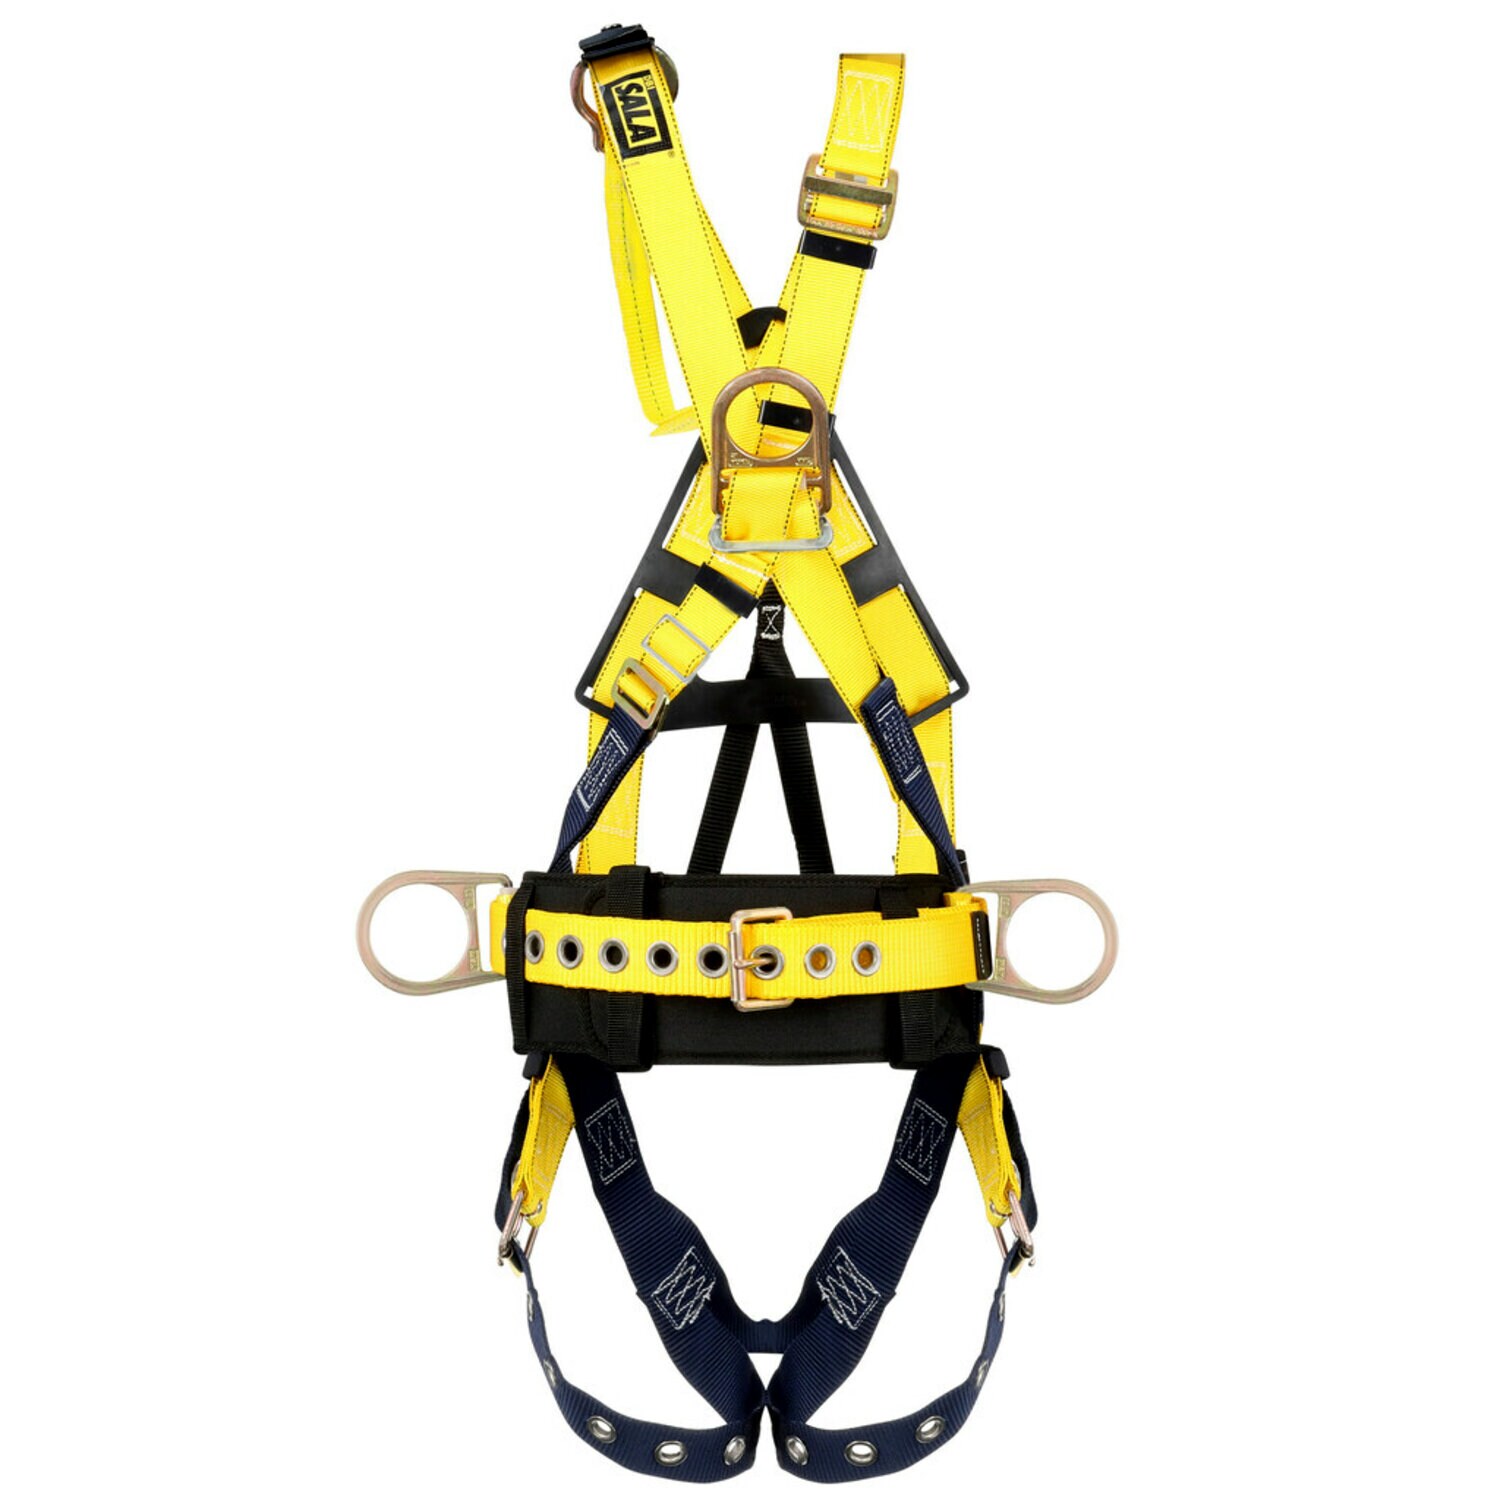 7100208191 - 3M DBI-SALA Delta Tower Harness, Side D Rings, Pole Restraint D
Rings, Stand-up Rear D Ring, TB 1106375 Universal